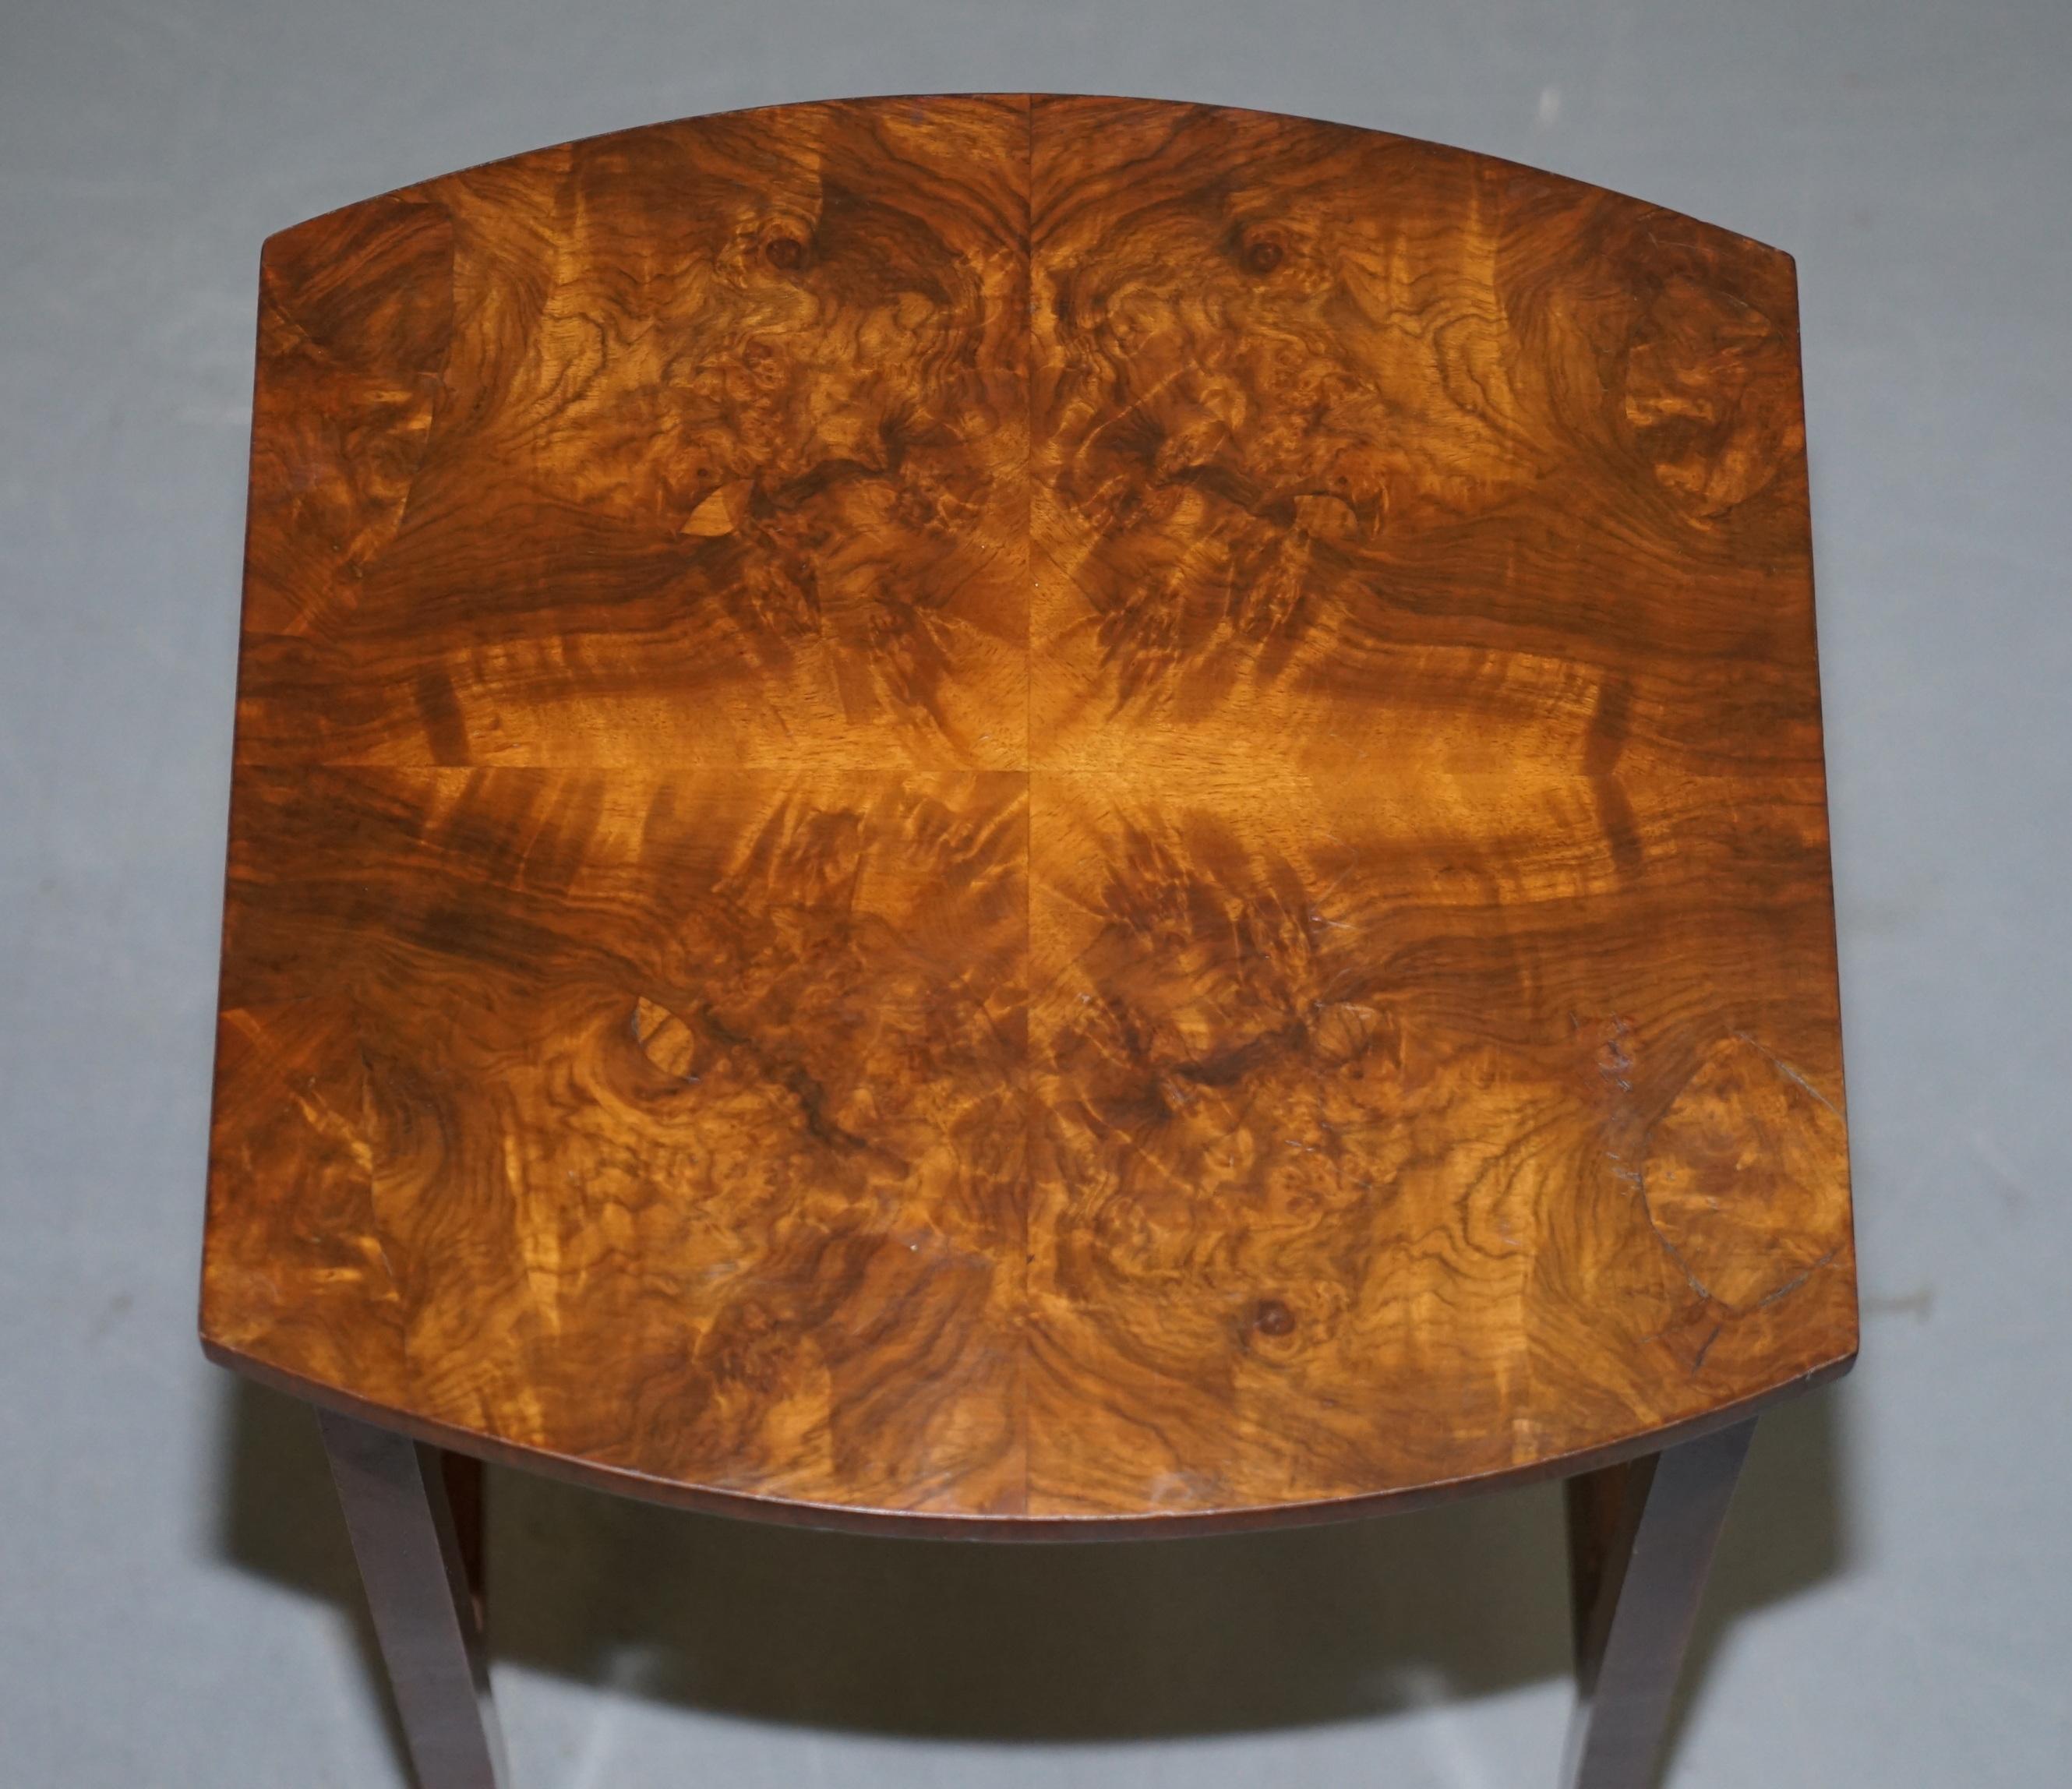 Lovely circa 1900 Late Victorian Burr Walnut Nest of Tables with Oval Main Piece For Sale 7